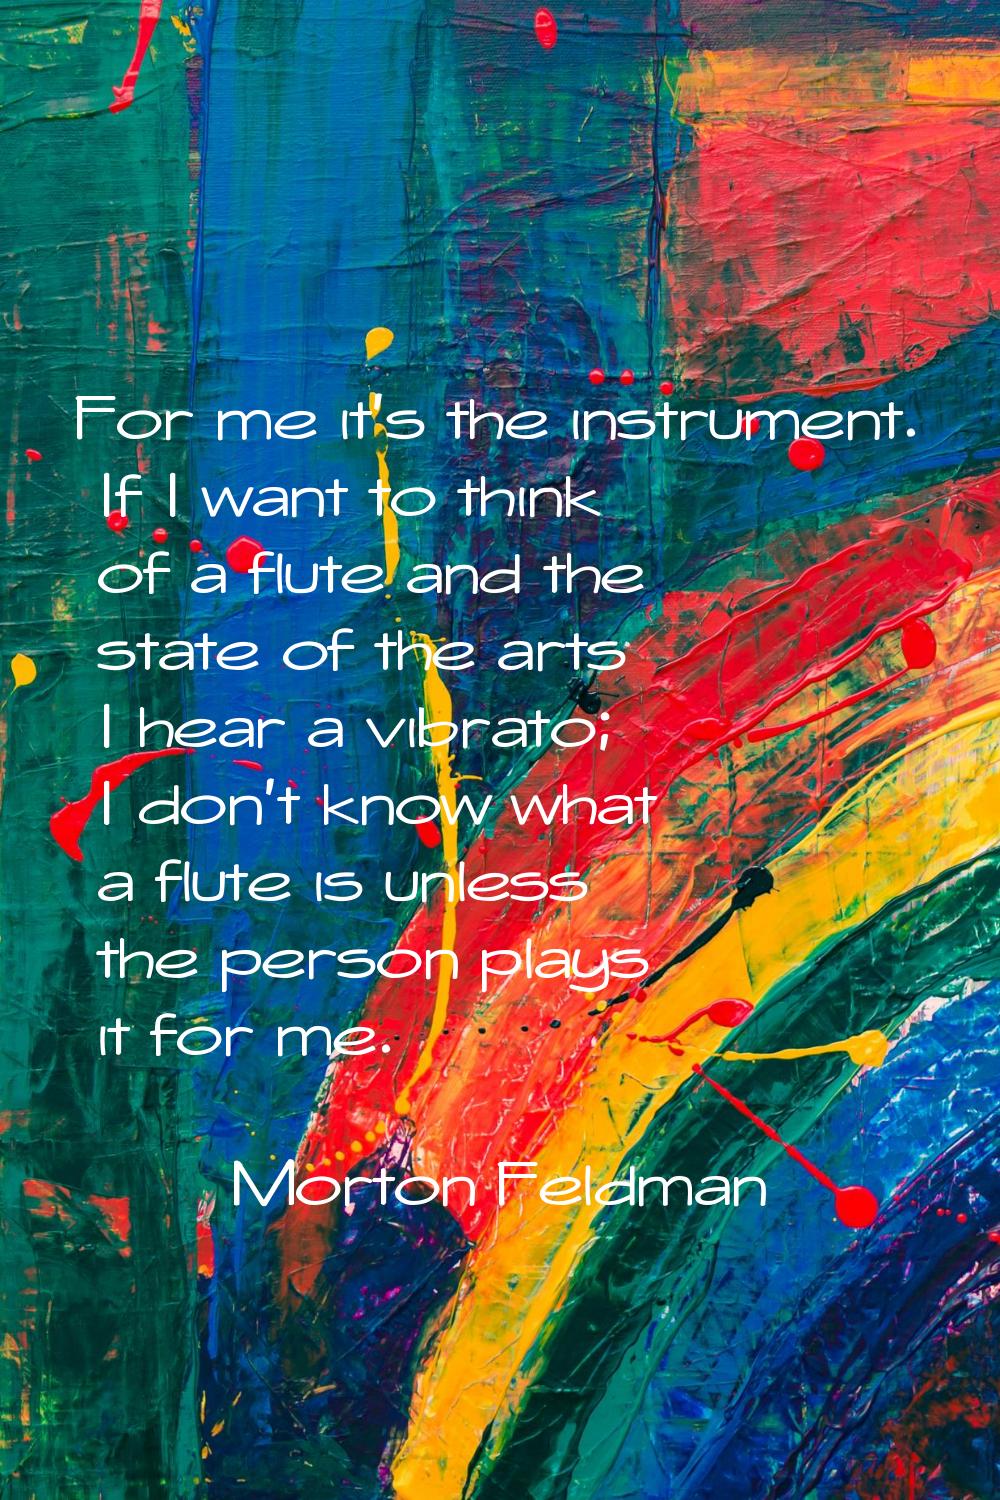 For me it's the instrument. If I want to think of a flute and the state of the arts I hear a vibrat